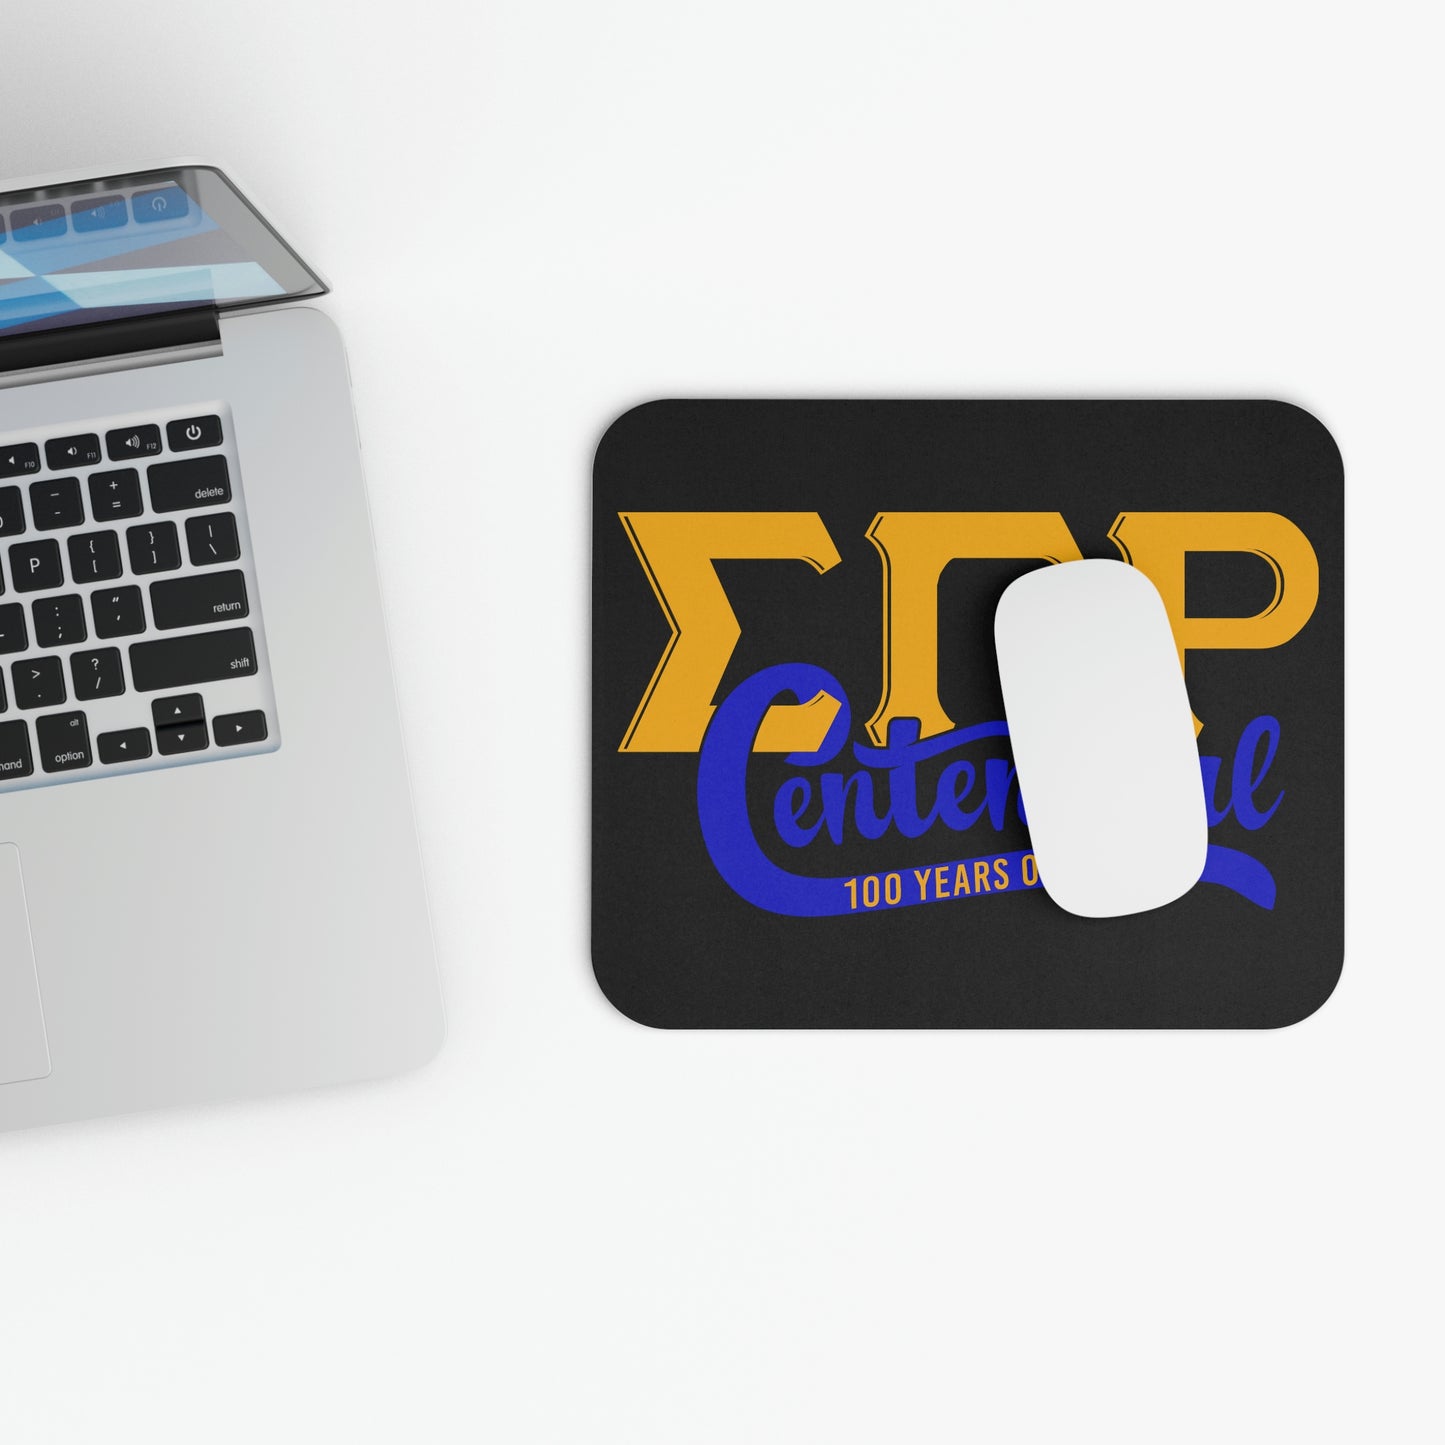 Centennial Sigma Gamma Rho Mouse Pad (3mm Thick)